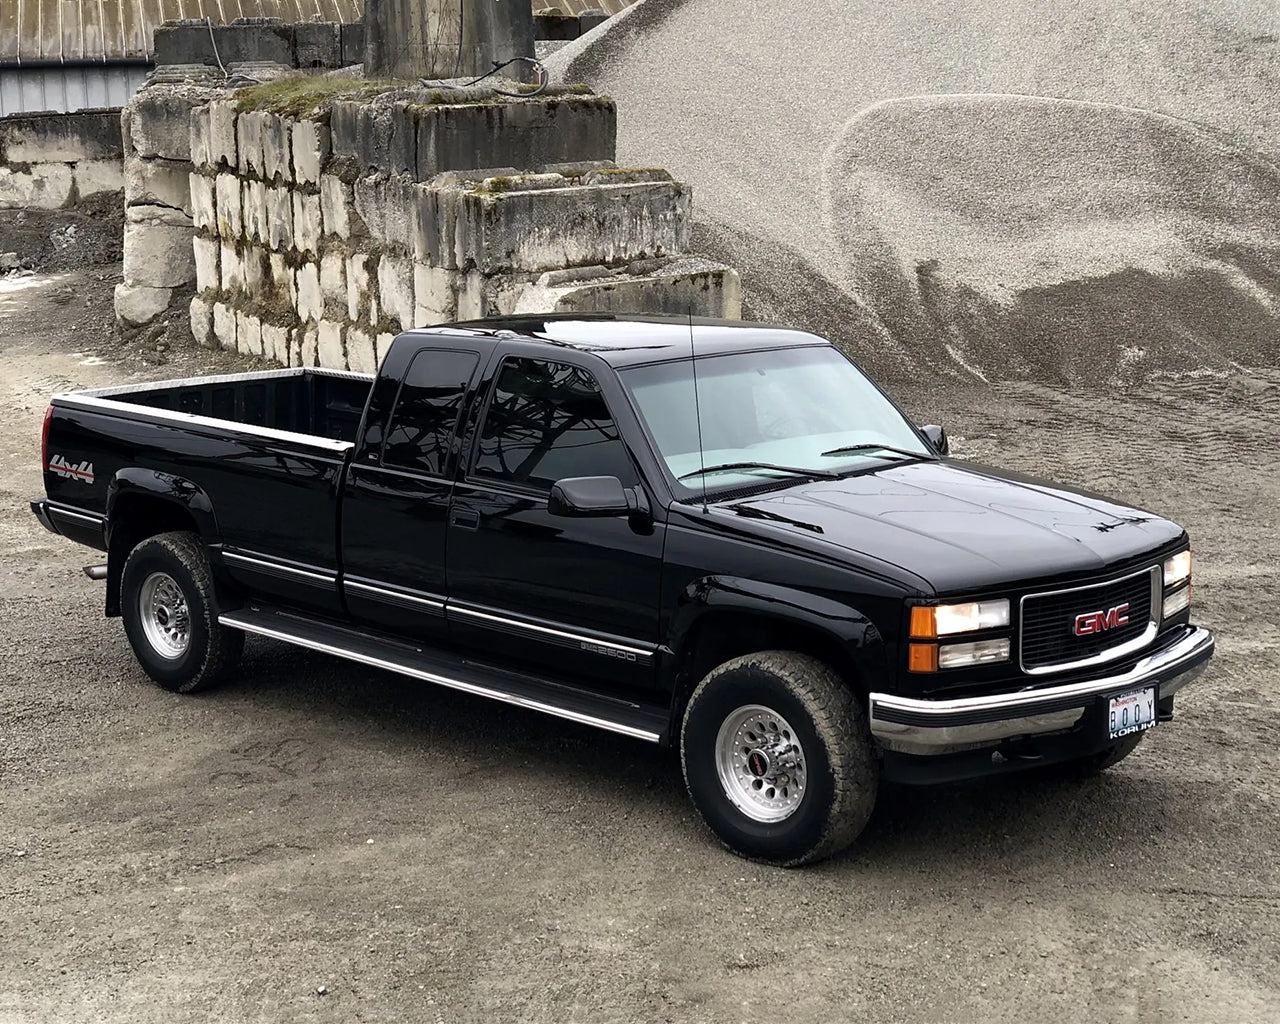 Black GMC C2500 parked in a construction zone, with brick concrete and a mound of rocks in the background